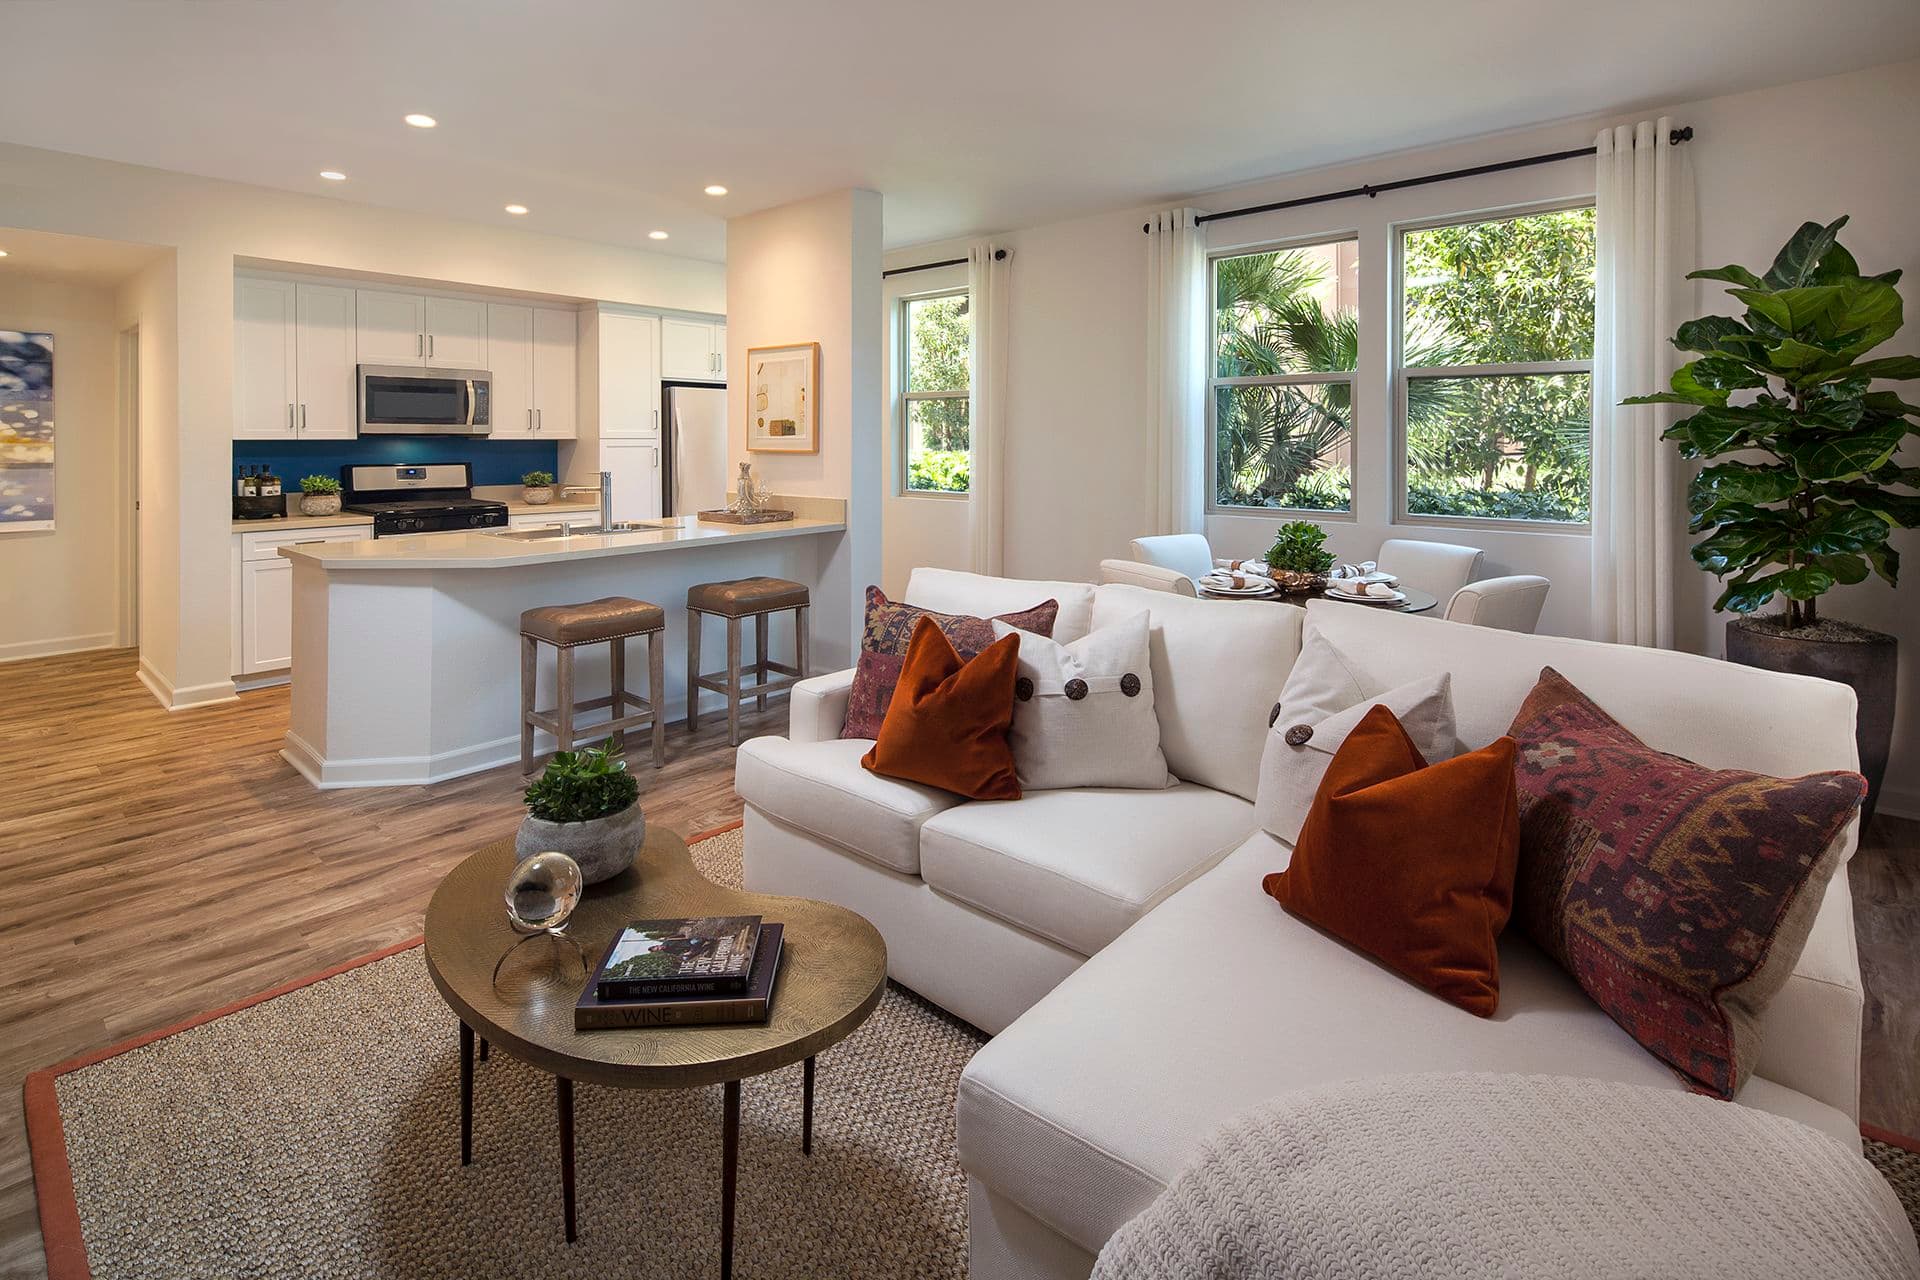 Living room and kitchen of Westview at Irvine Spectrum Apartment Homes in Irvine, CA.